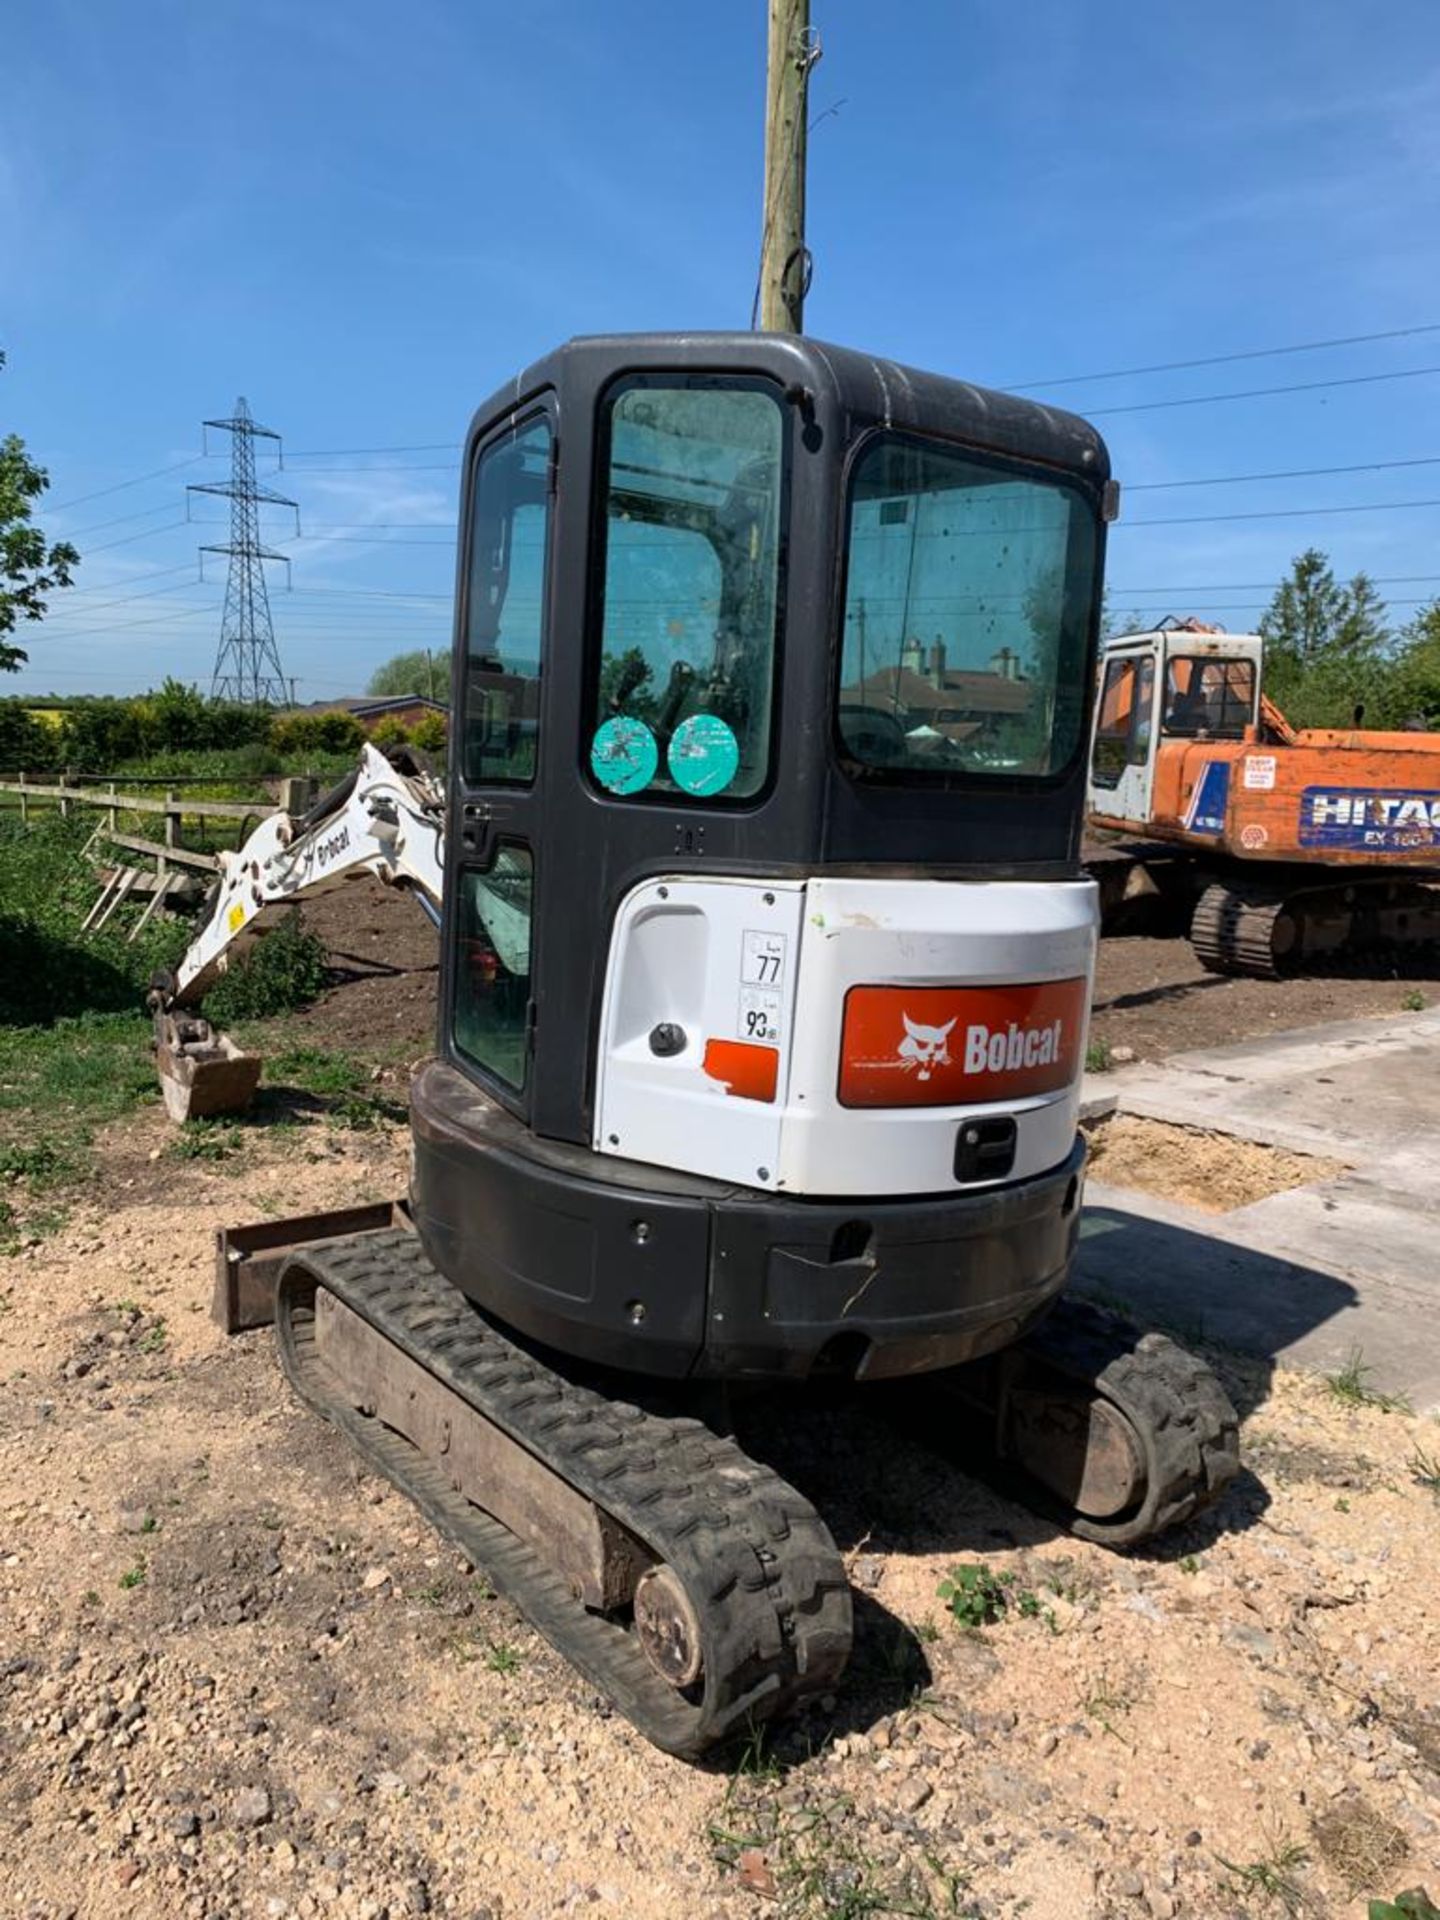 BOBCAT E25 RUBBER TRACKED COMPACT EXCAVATOR / DIGGER, YEAR 2014, 15.3 KW, MASS 2516 KG *PLUS VAT* - Image 4 of 18